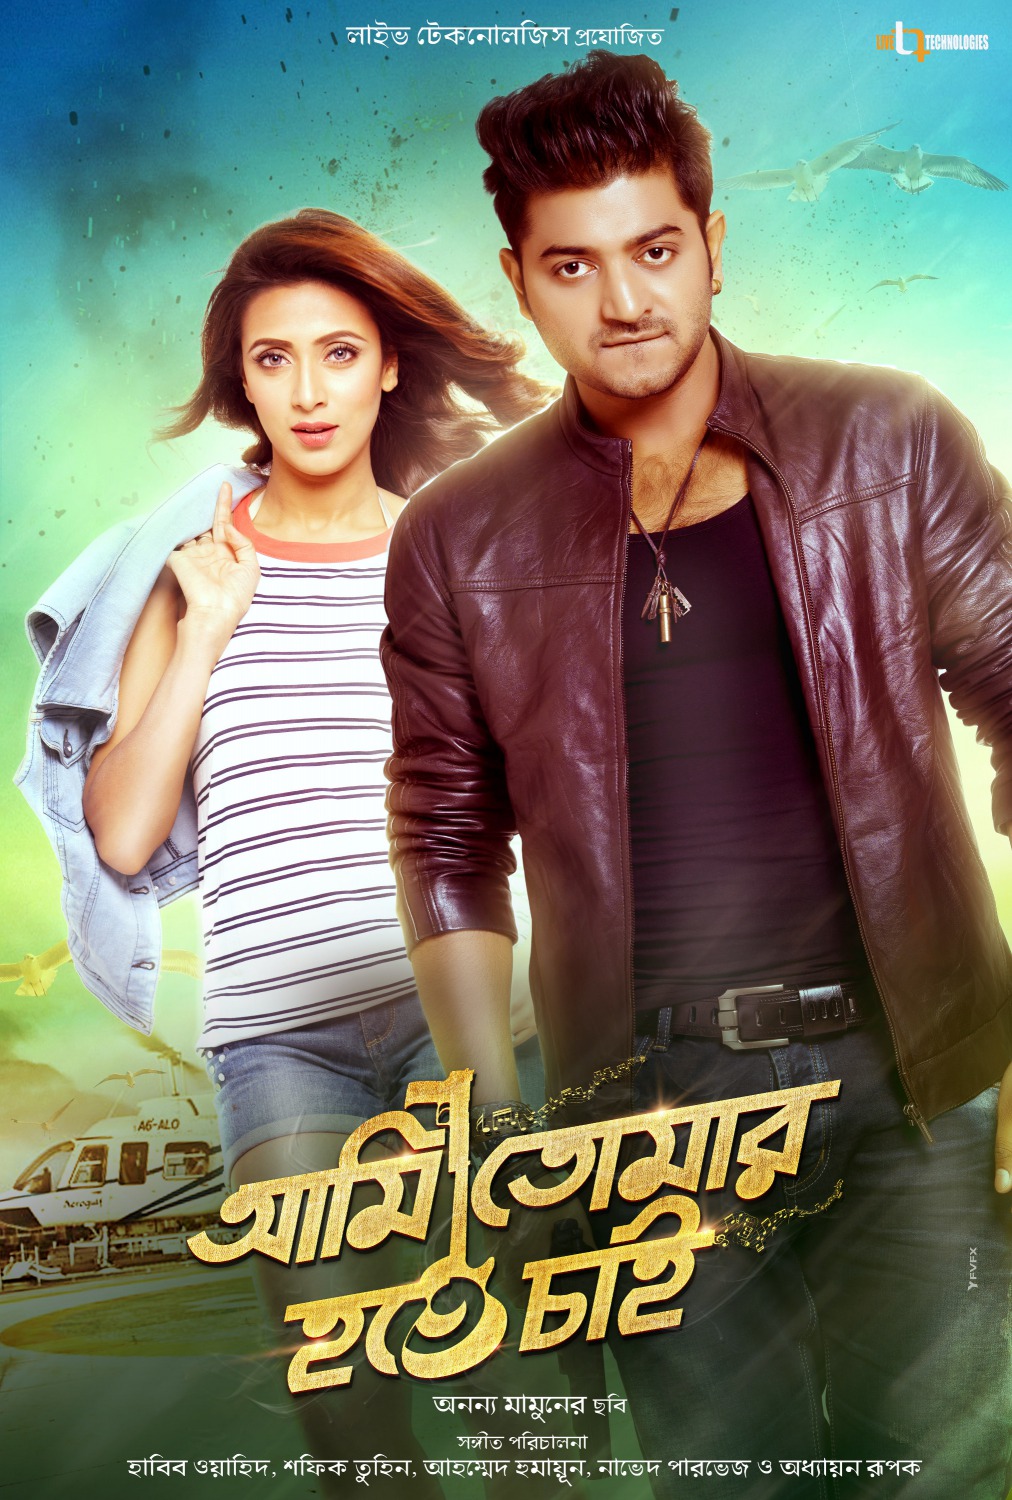 Extra Large Movie Poster Image for Ami Tomar Hote Chai (#10 of 11)